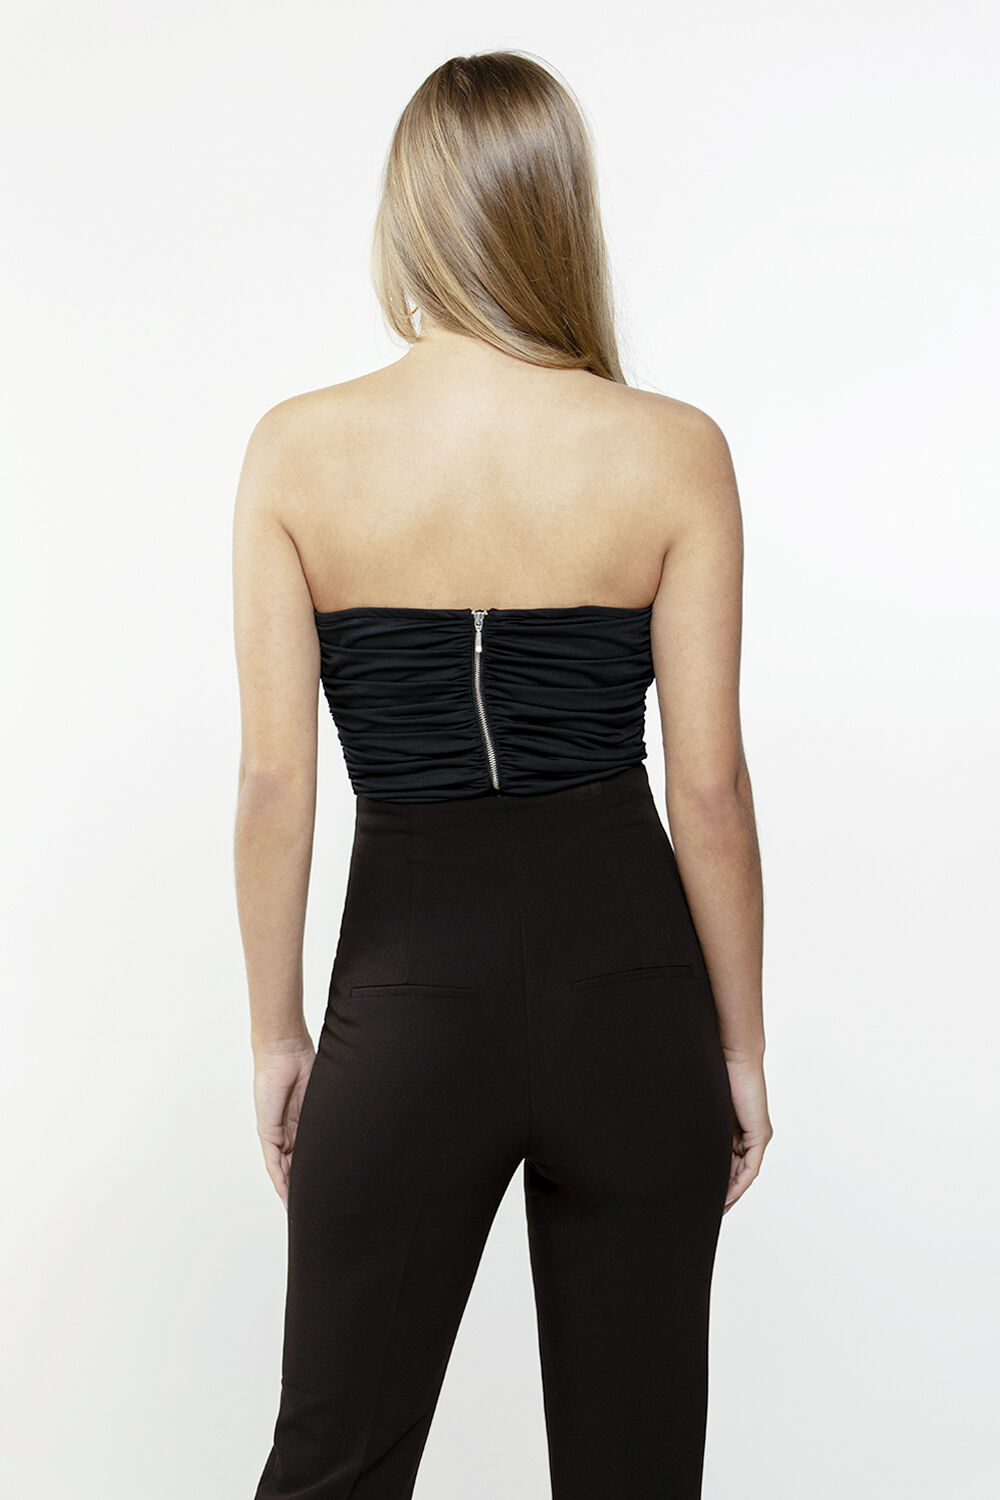 Black Ruched Bodysuit by Yuzefi on Sale